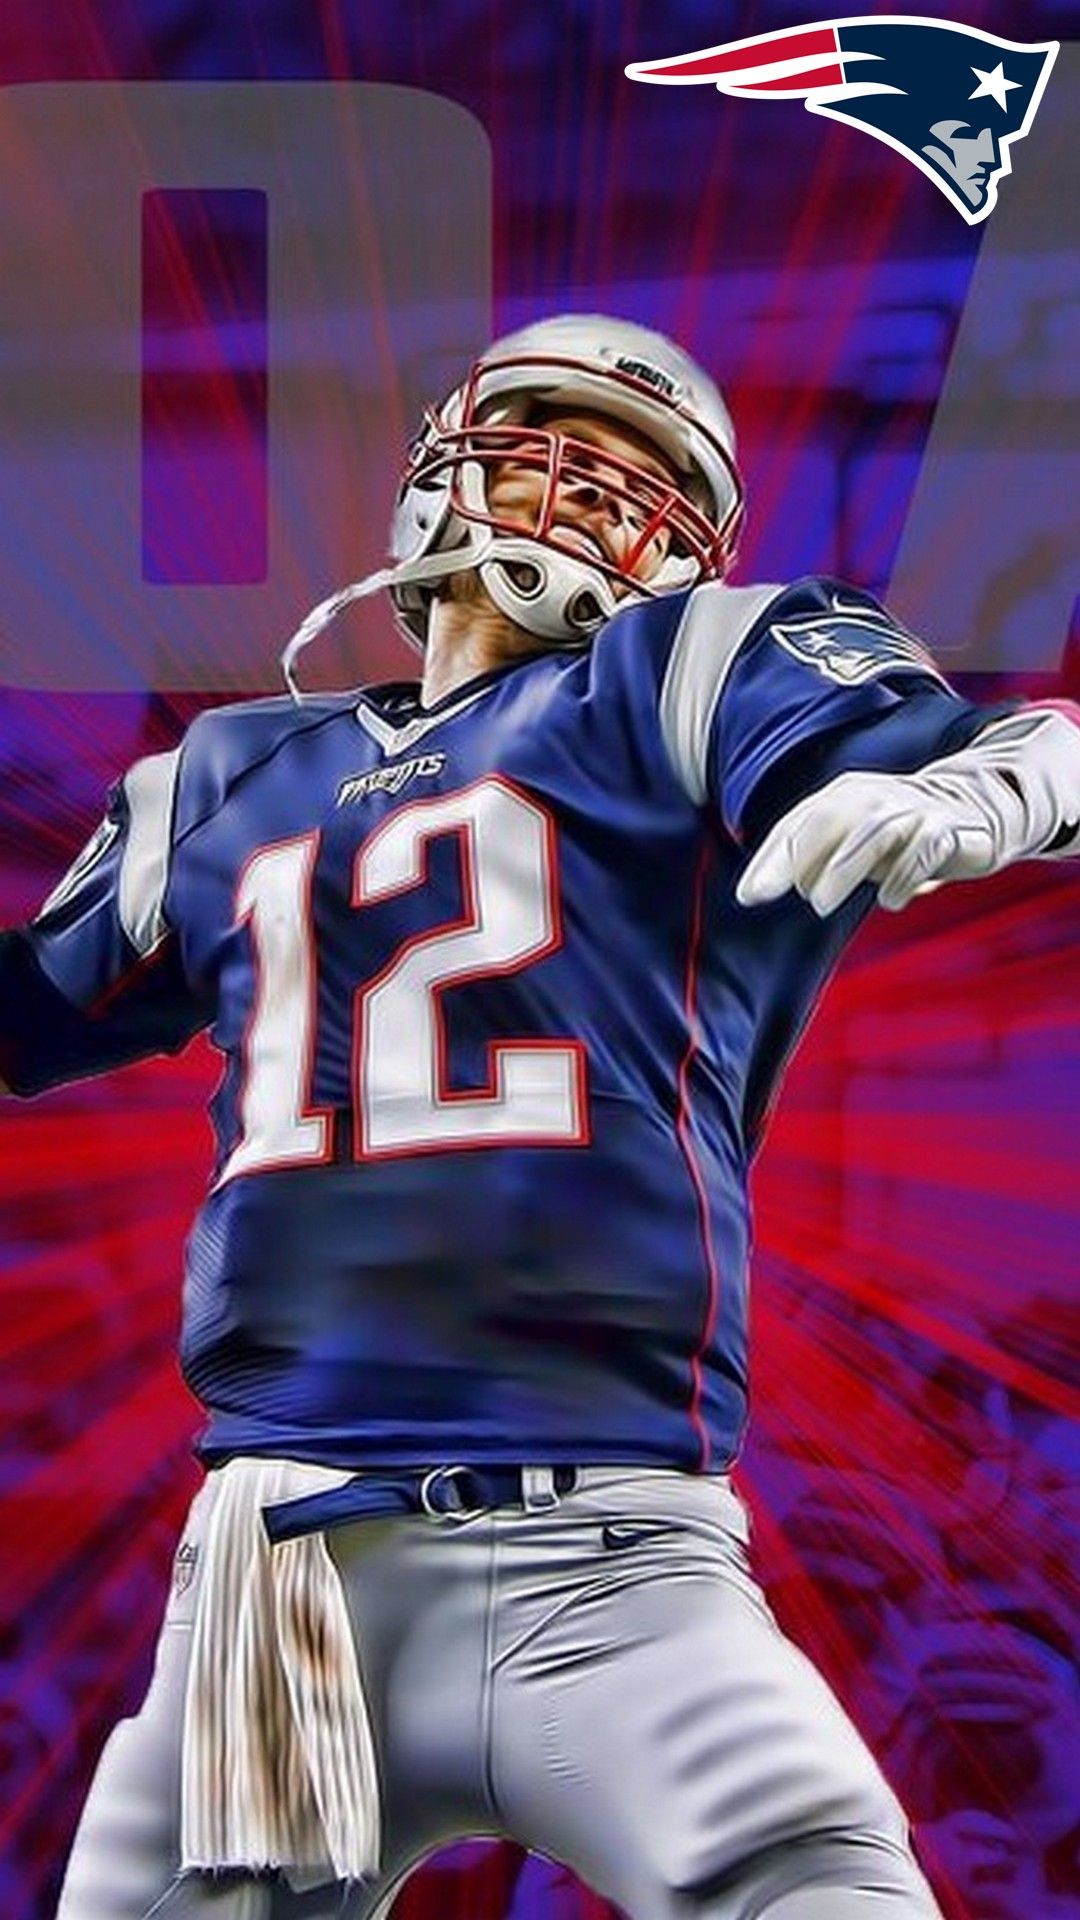 Tom Brady Goat HD Wallpaper For iPhone   2022 NFL Football Wallpapers 1080x1920